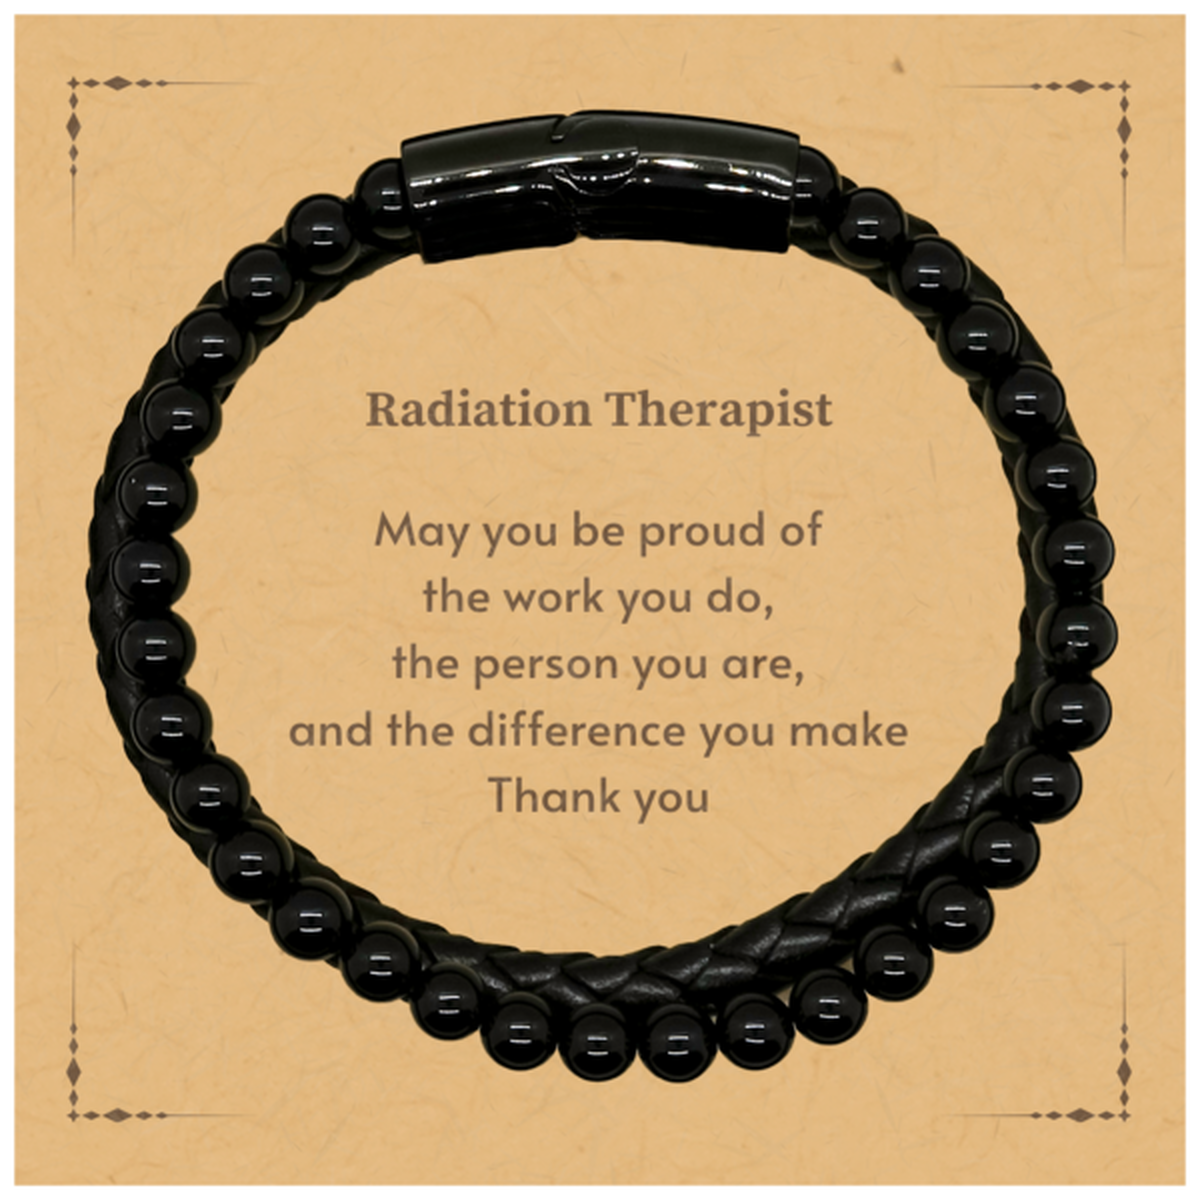 Heartwarming Stone Leather Bracelets Retirement Coworkers Gifts for Radiation Therapist, Radiation Therapist May You be proud of the work you do, the person you are Gifts for Boss Men Women Friends